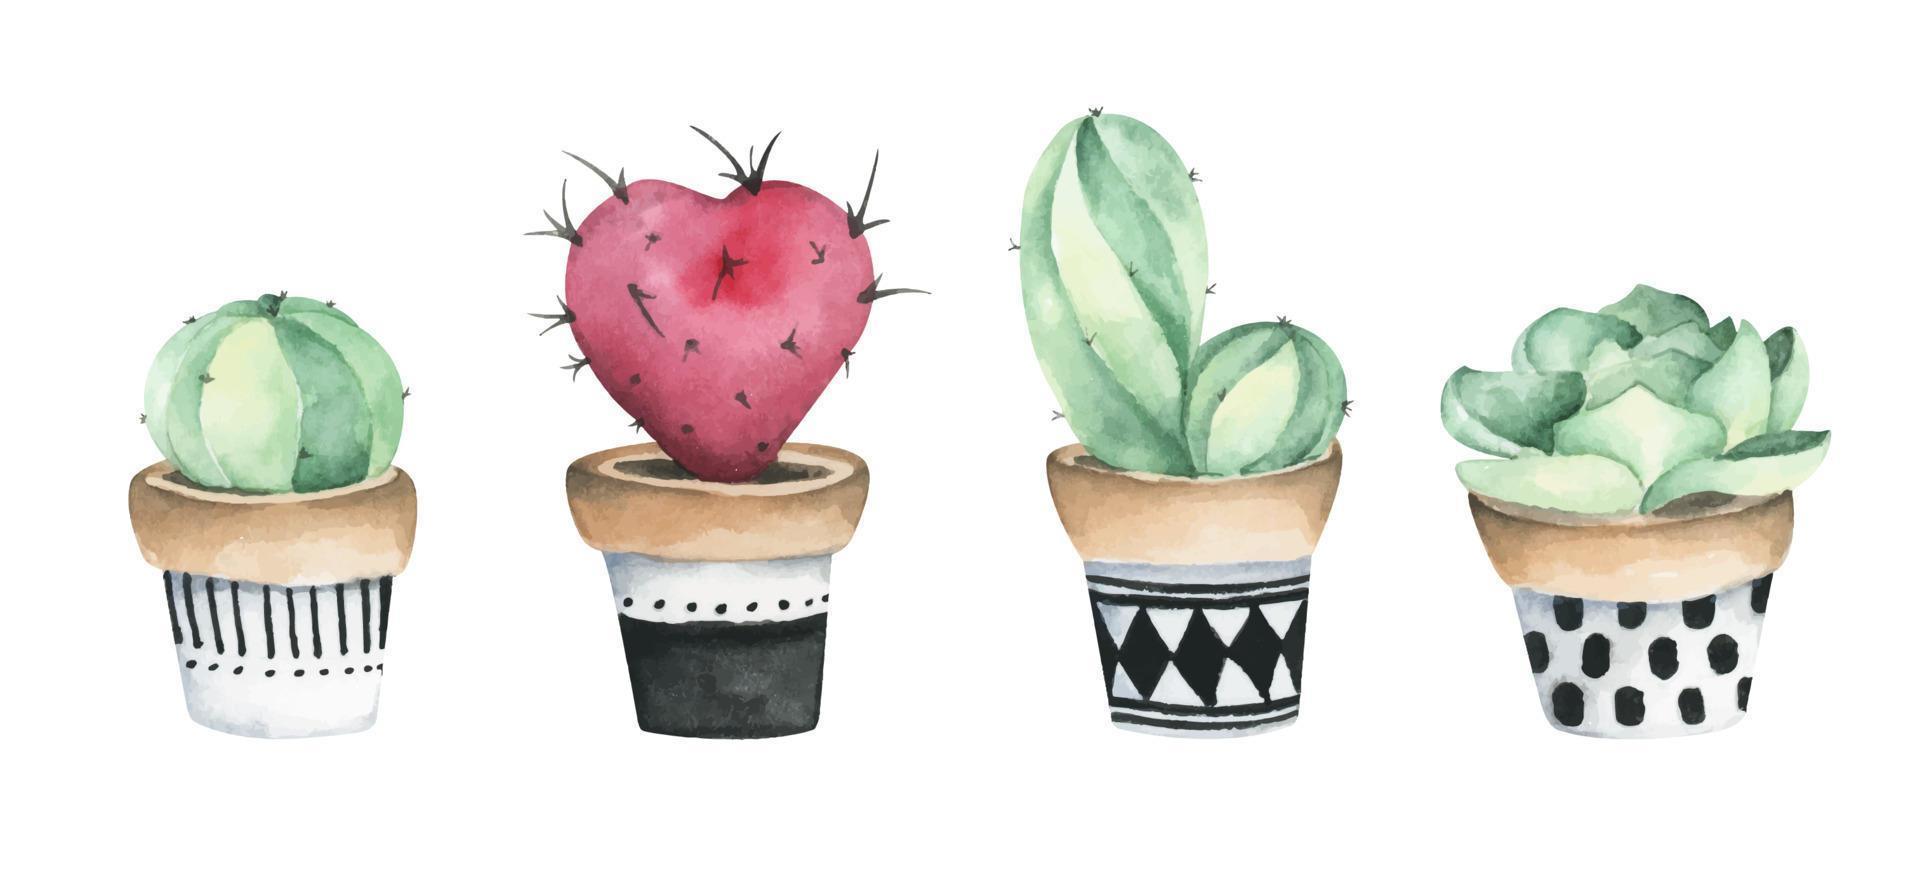 Set of Cactus potted. Watercolor illustration. vector